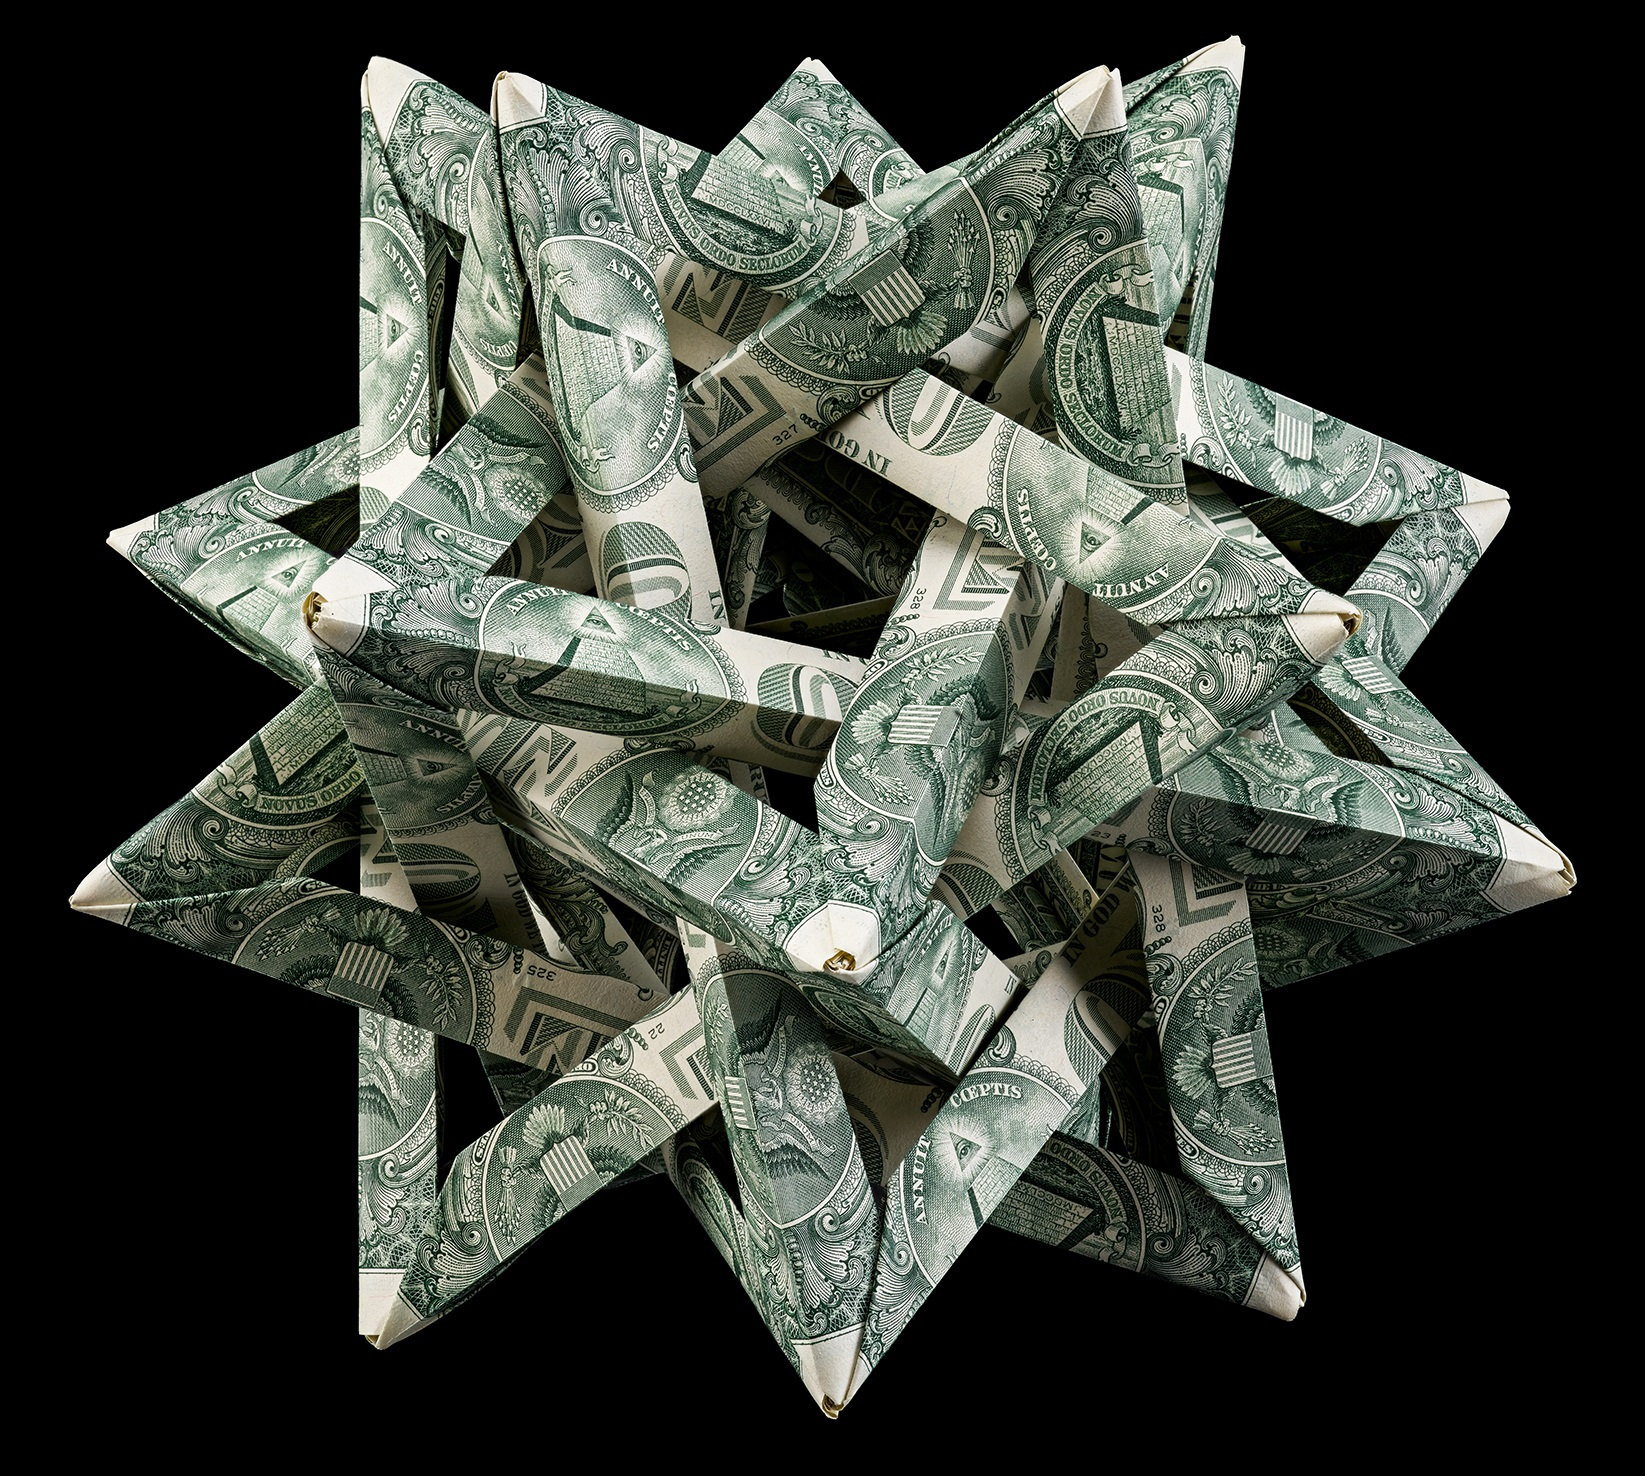 Origami Dollar Bill Shirt With Tie Art From Money Paper Money Origami National Museum Of American